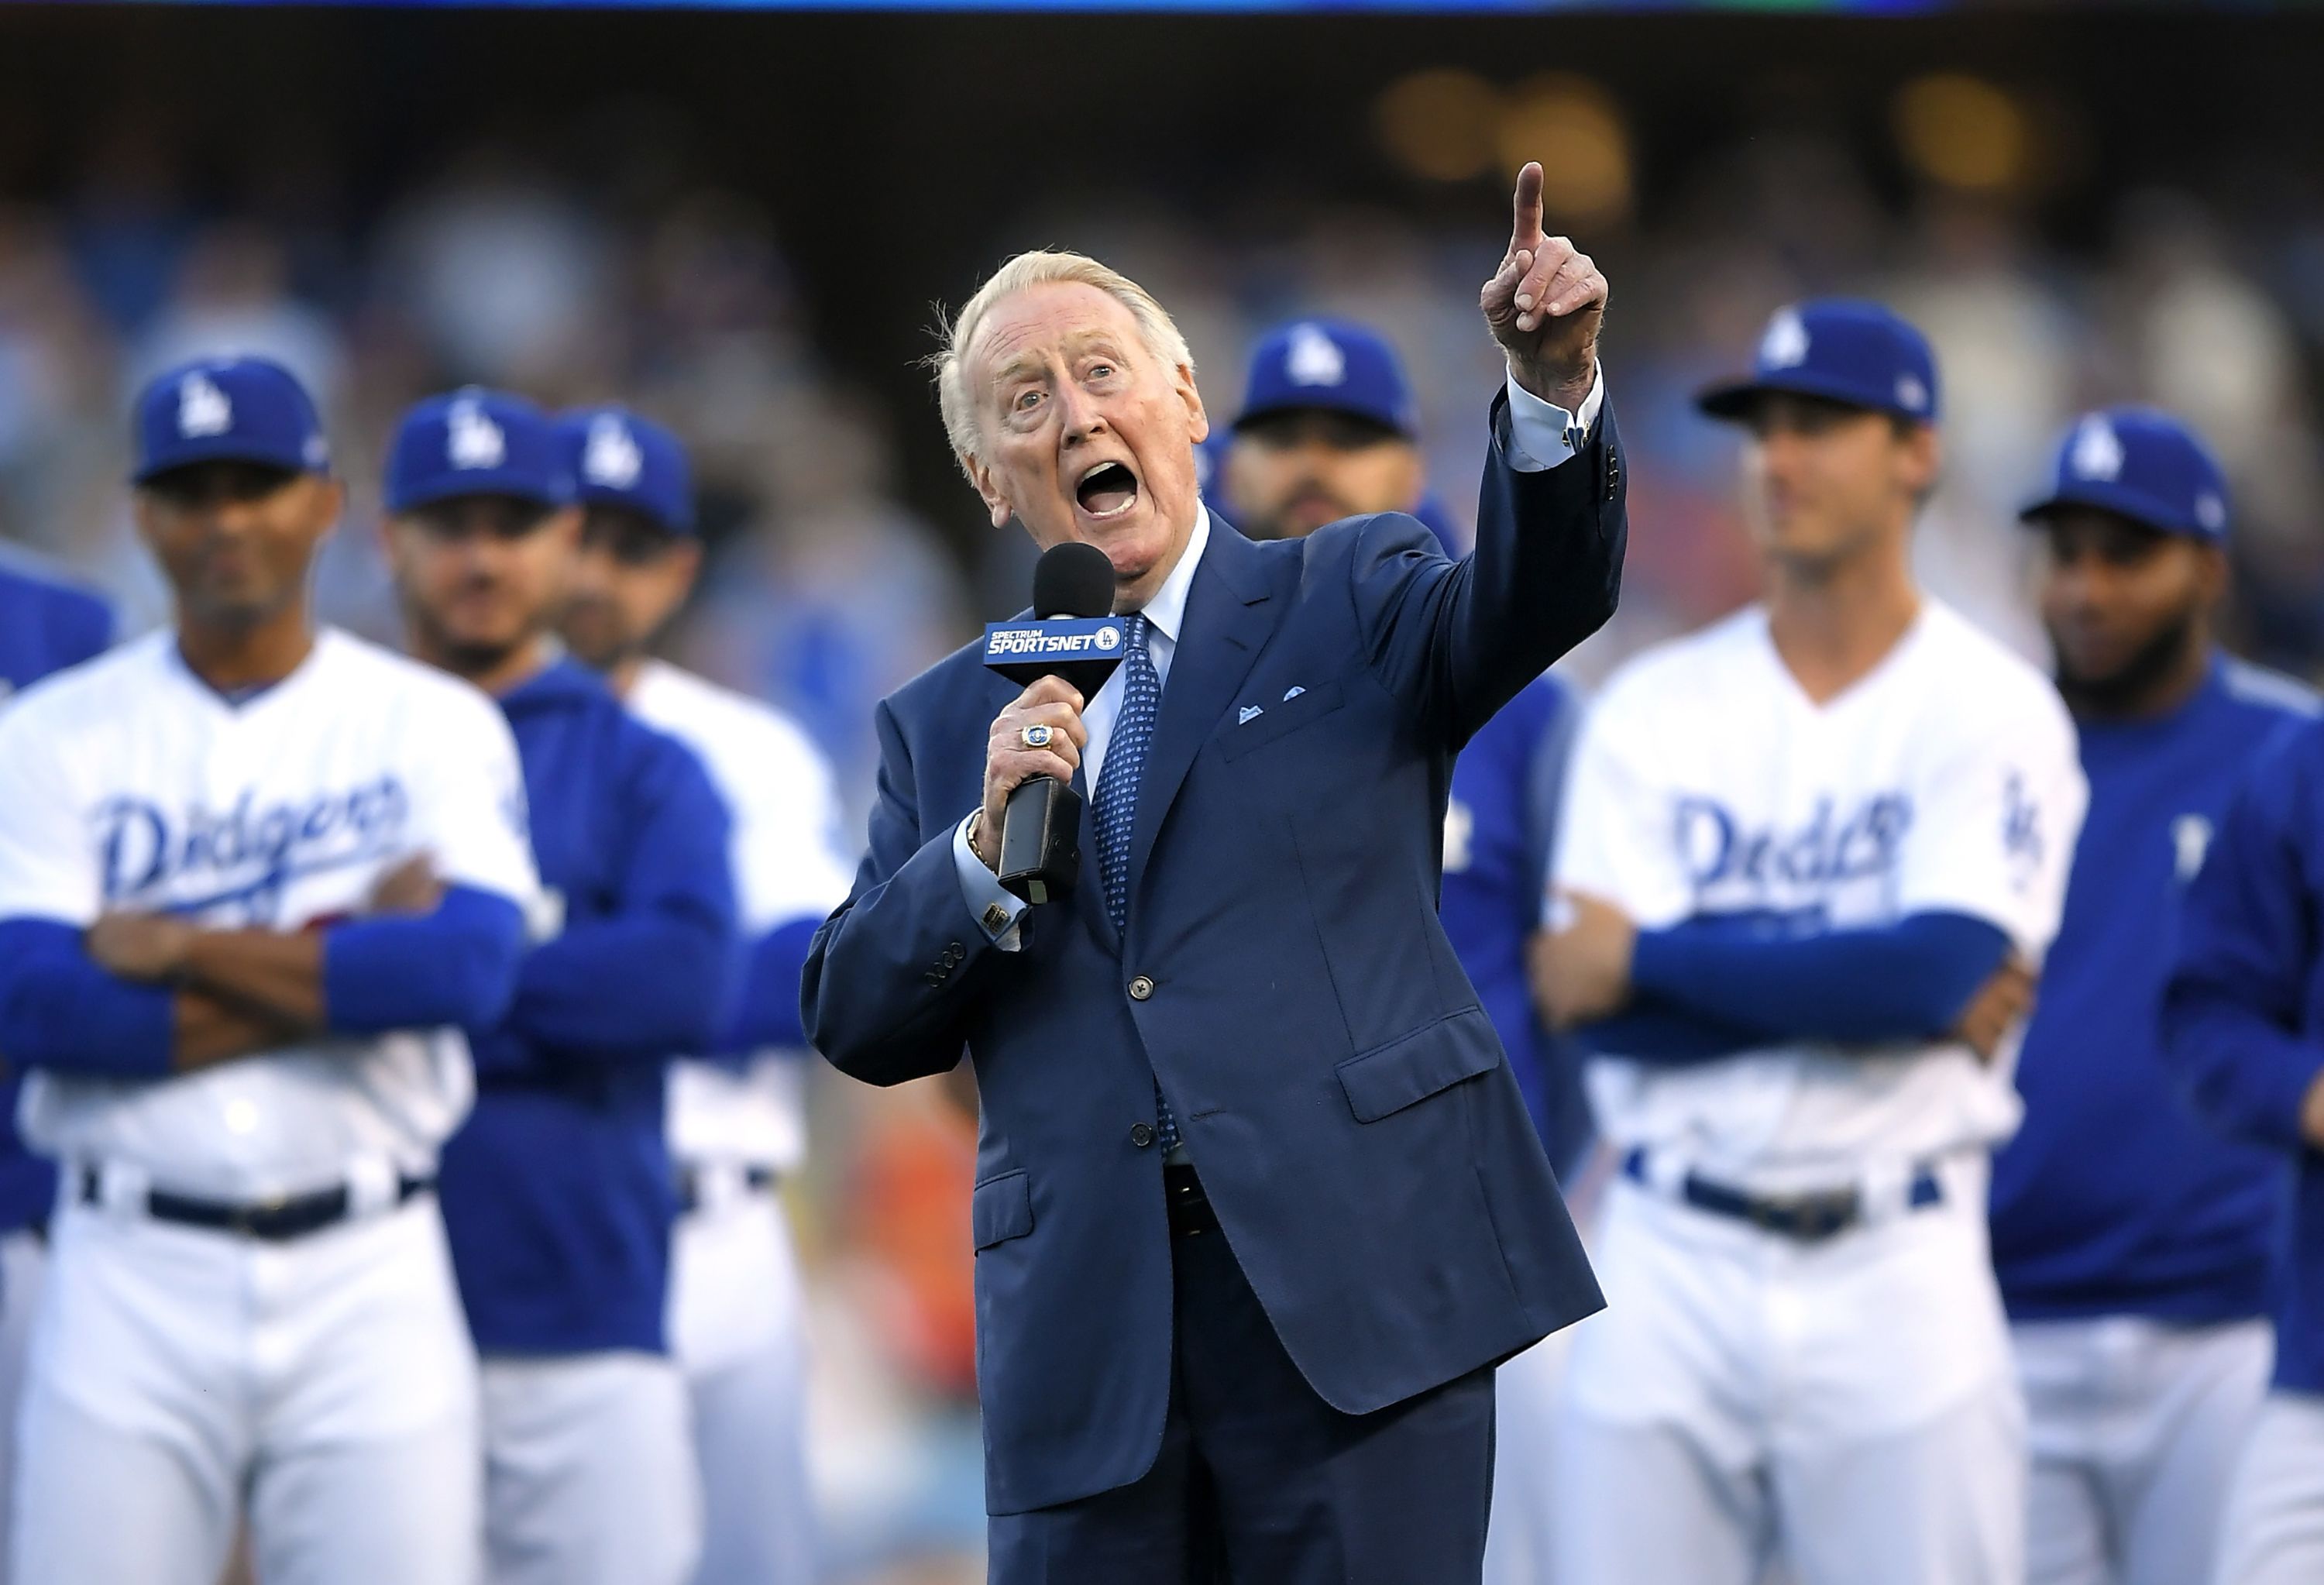 Vin Scully, legendary baseball announcer and committed Catholic, dies at 94